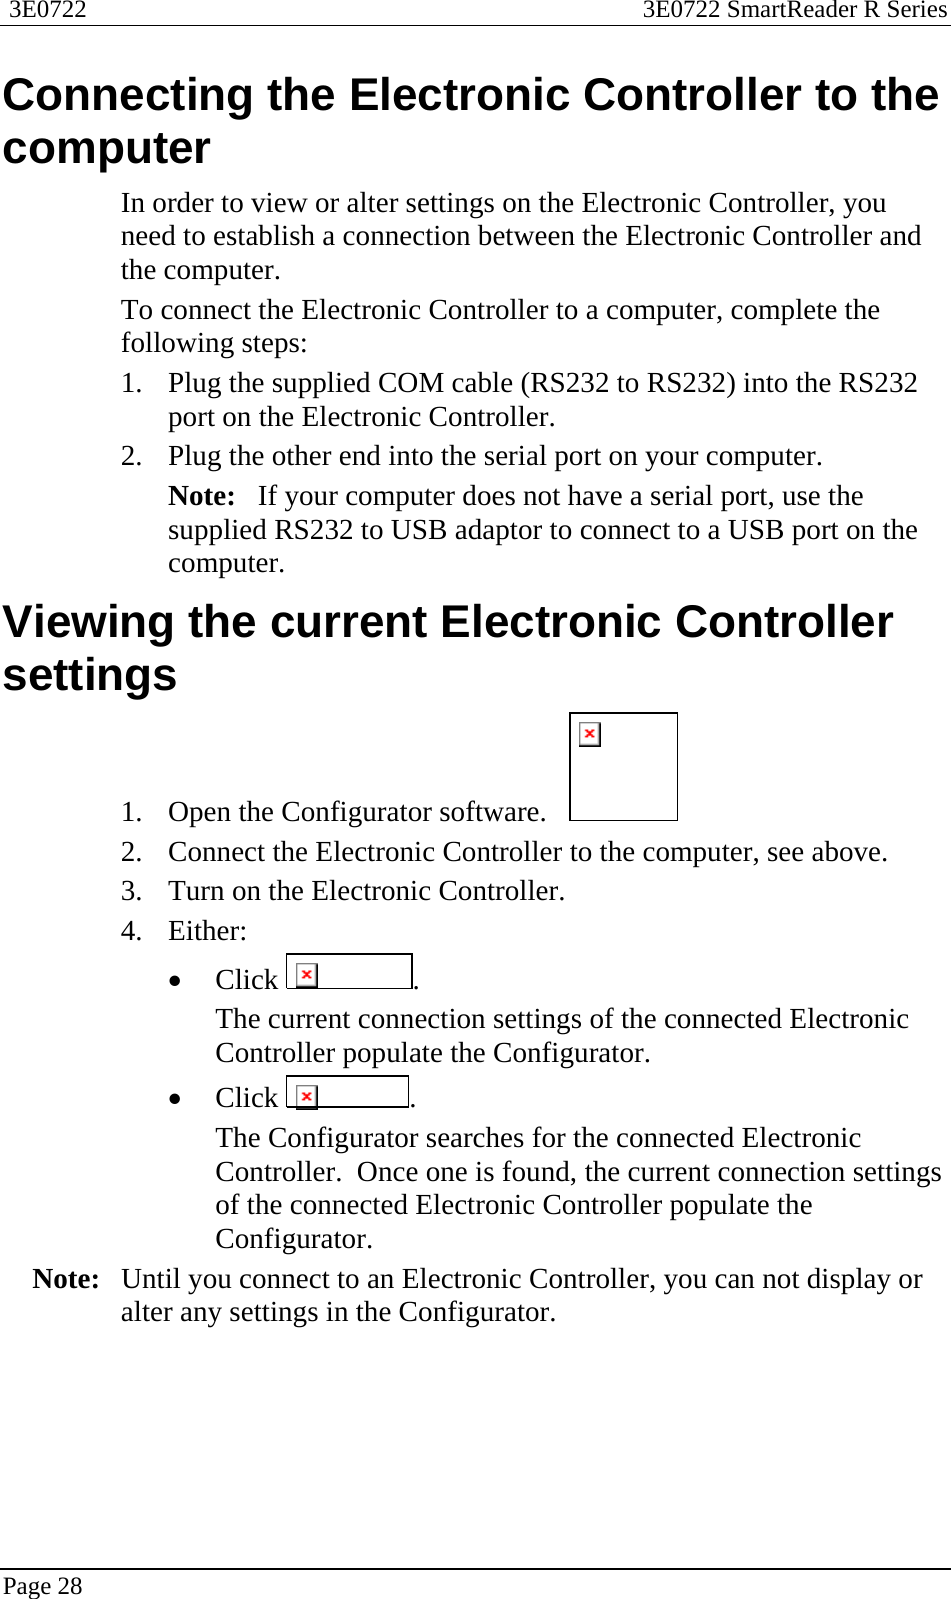  3E0722  3E0722 SmartReader R Series  Page 28  Connecting the Electronic Controller to the computer In order to view or alter settings on the Electronic Controller, you need to establish a connection between the Electronic Controller and the computer. To connect the Electronic Controller to a computer, complete the following steps: 1. Plug the supplied COM cable (RS232 to RS232) into the RS232 port on the Electronic Controller. 2. Plug the other end into the serial port on your computer.   Note:   If your computer does not have a serial port, use the supplied RS232 to USB adaptor to connect to a USB port on the computer.  Viewing the current Electronic Controller settings 1. Open the Configurator software.     2. Connect the Electronic Controller to the computer, see above. 3. Turn on the Electronic Controller. 4. Either: • Click  . The current connection settings of the connected Electronic Controller populate the Configurator. • Click  . The Configurator searches for the connected Electronic Controller.  Once one is found, the current connection settings of the connected Electronic Controller populate the Configurator. Note:  Until you connect to an Electronic Controller, you can not display or alter any settings in the Configurator.  